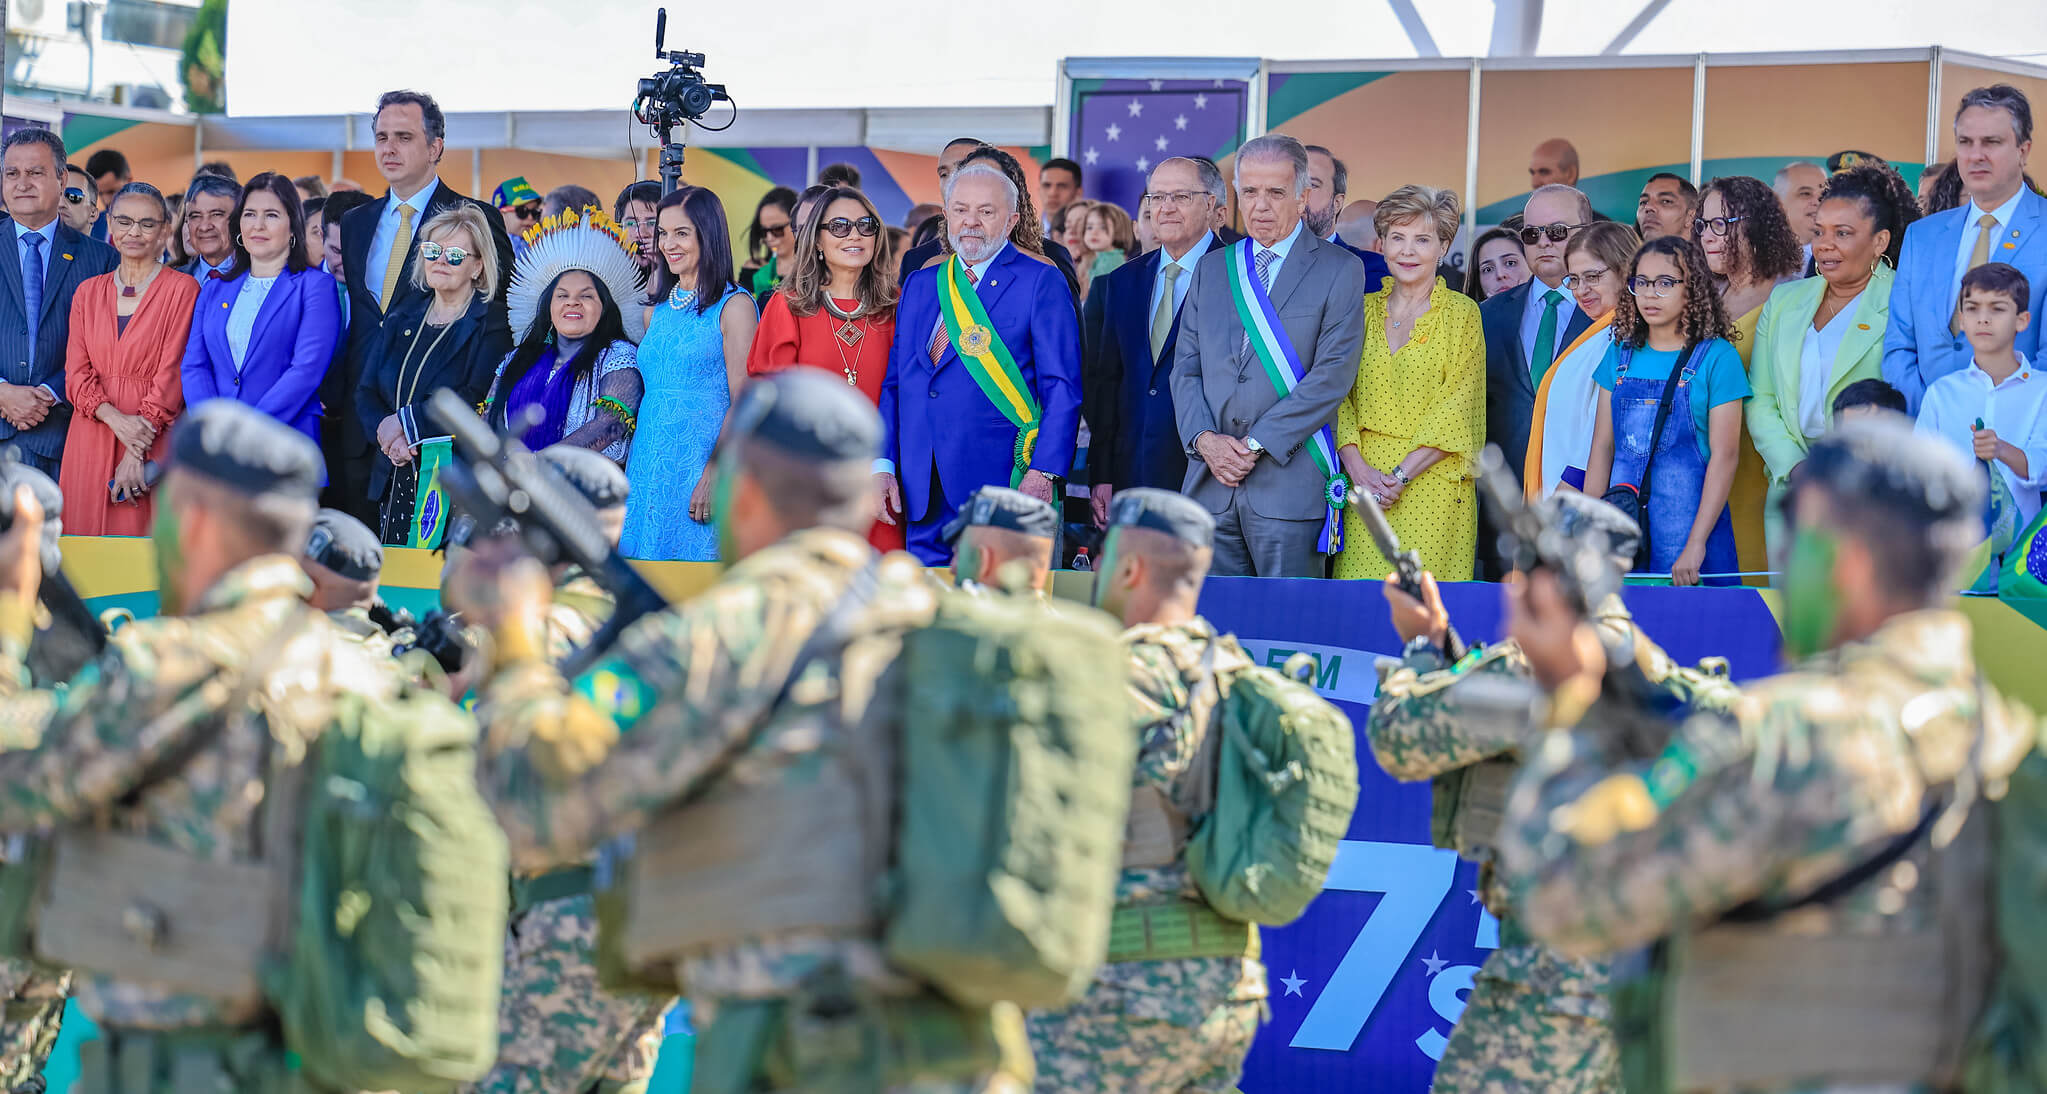 President Lula and other authorities attend the military parade in Brasília (Ricardo Stuckert / Presidency of Brazil courtesy)